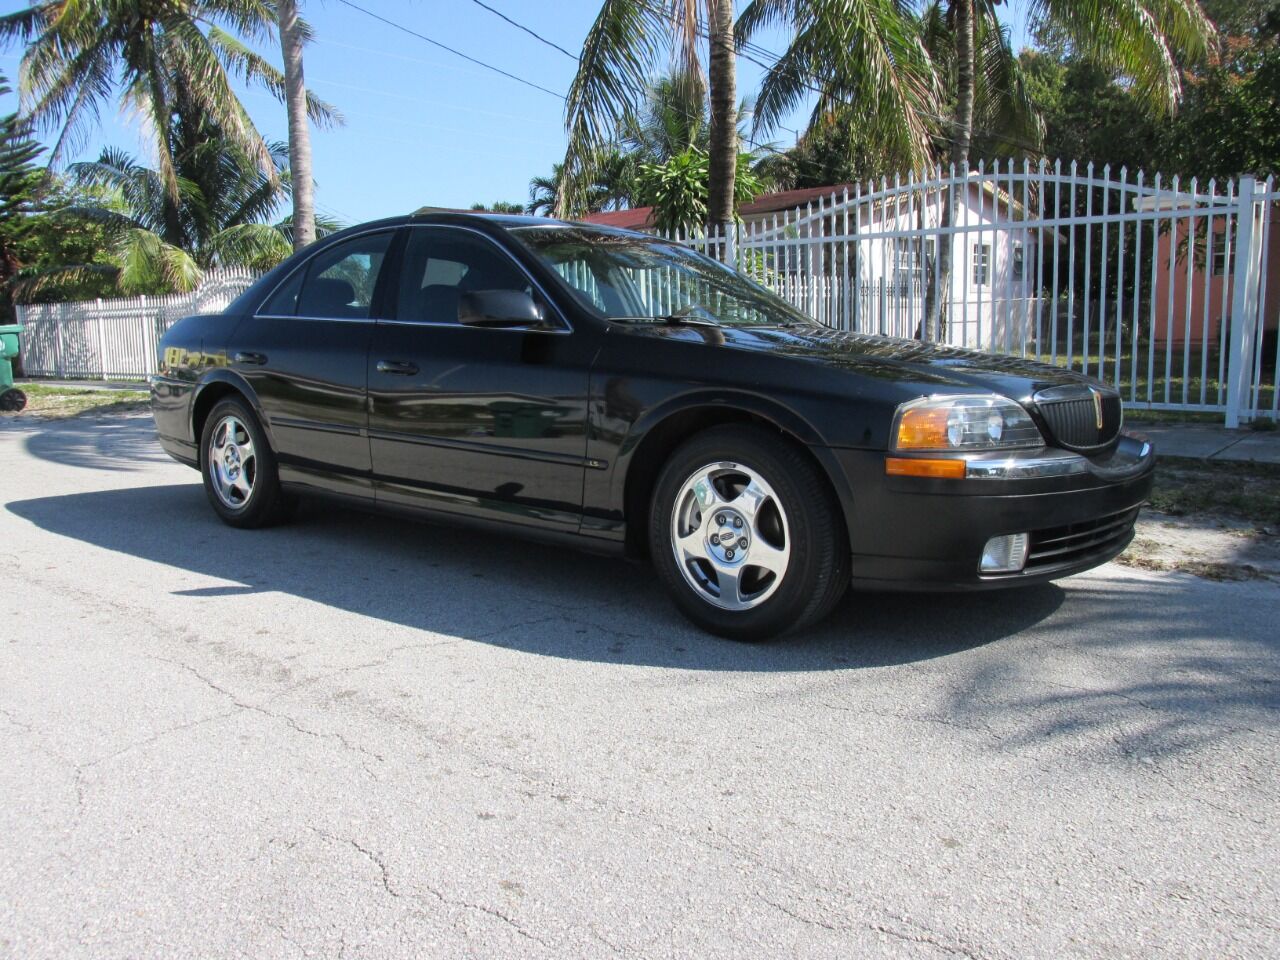 2000 Lincoln LS For Sale - Carsforsale.com®